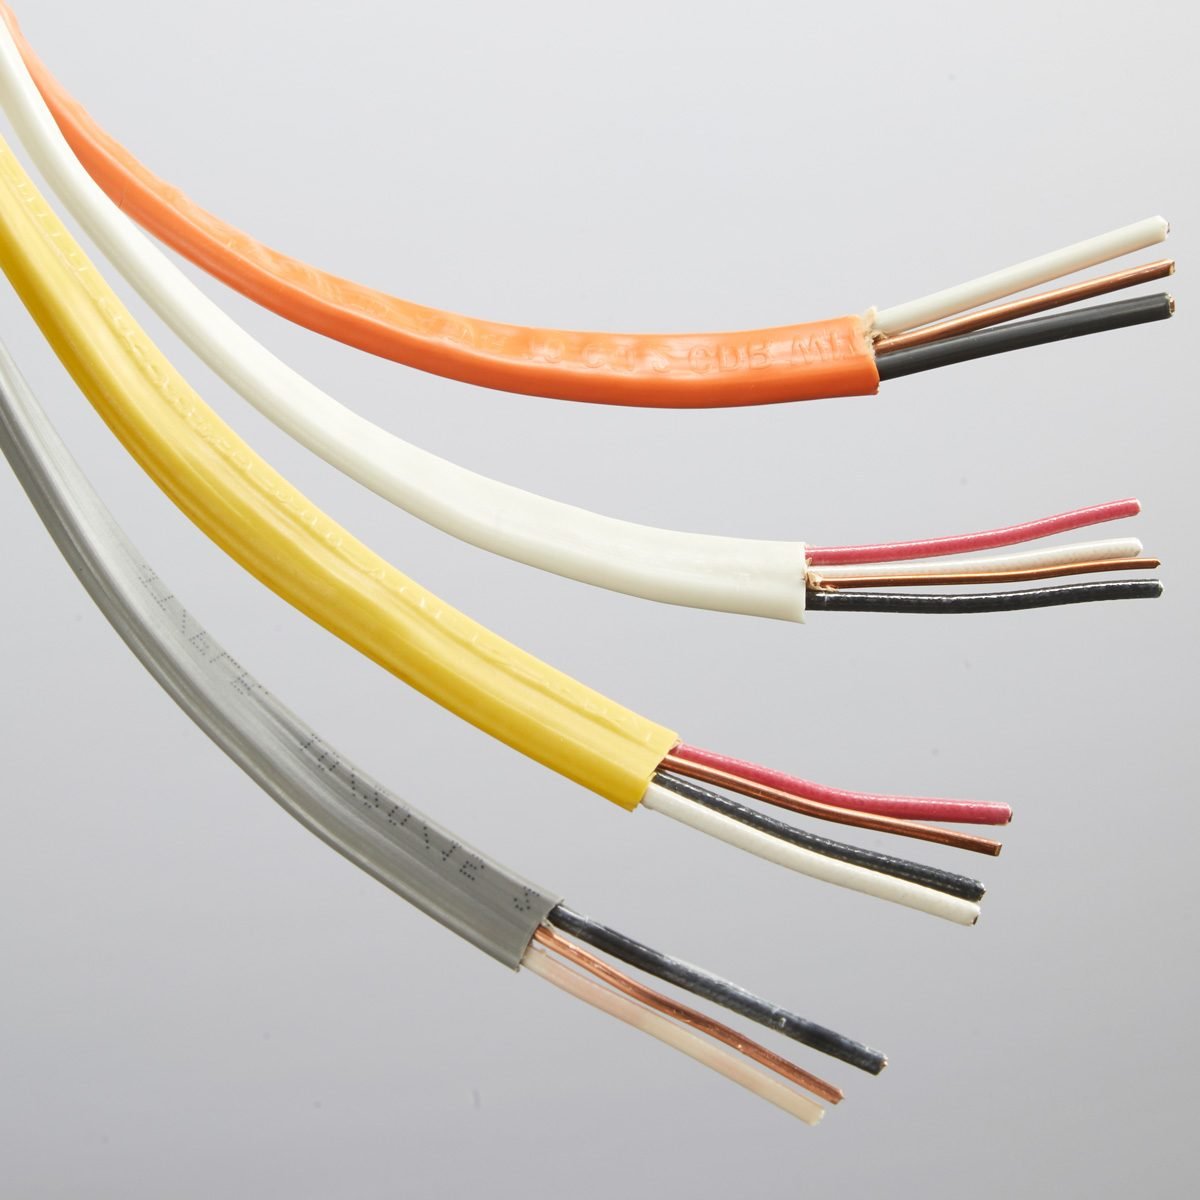 Homeowner Electrical Cable Basics | The Family Handyman